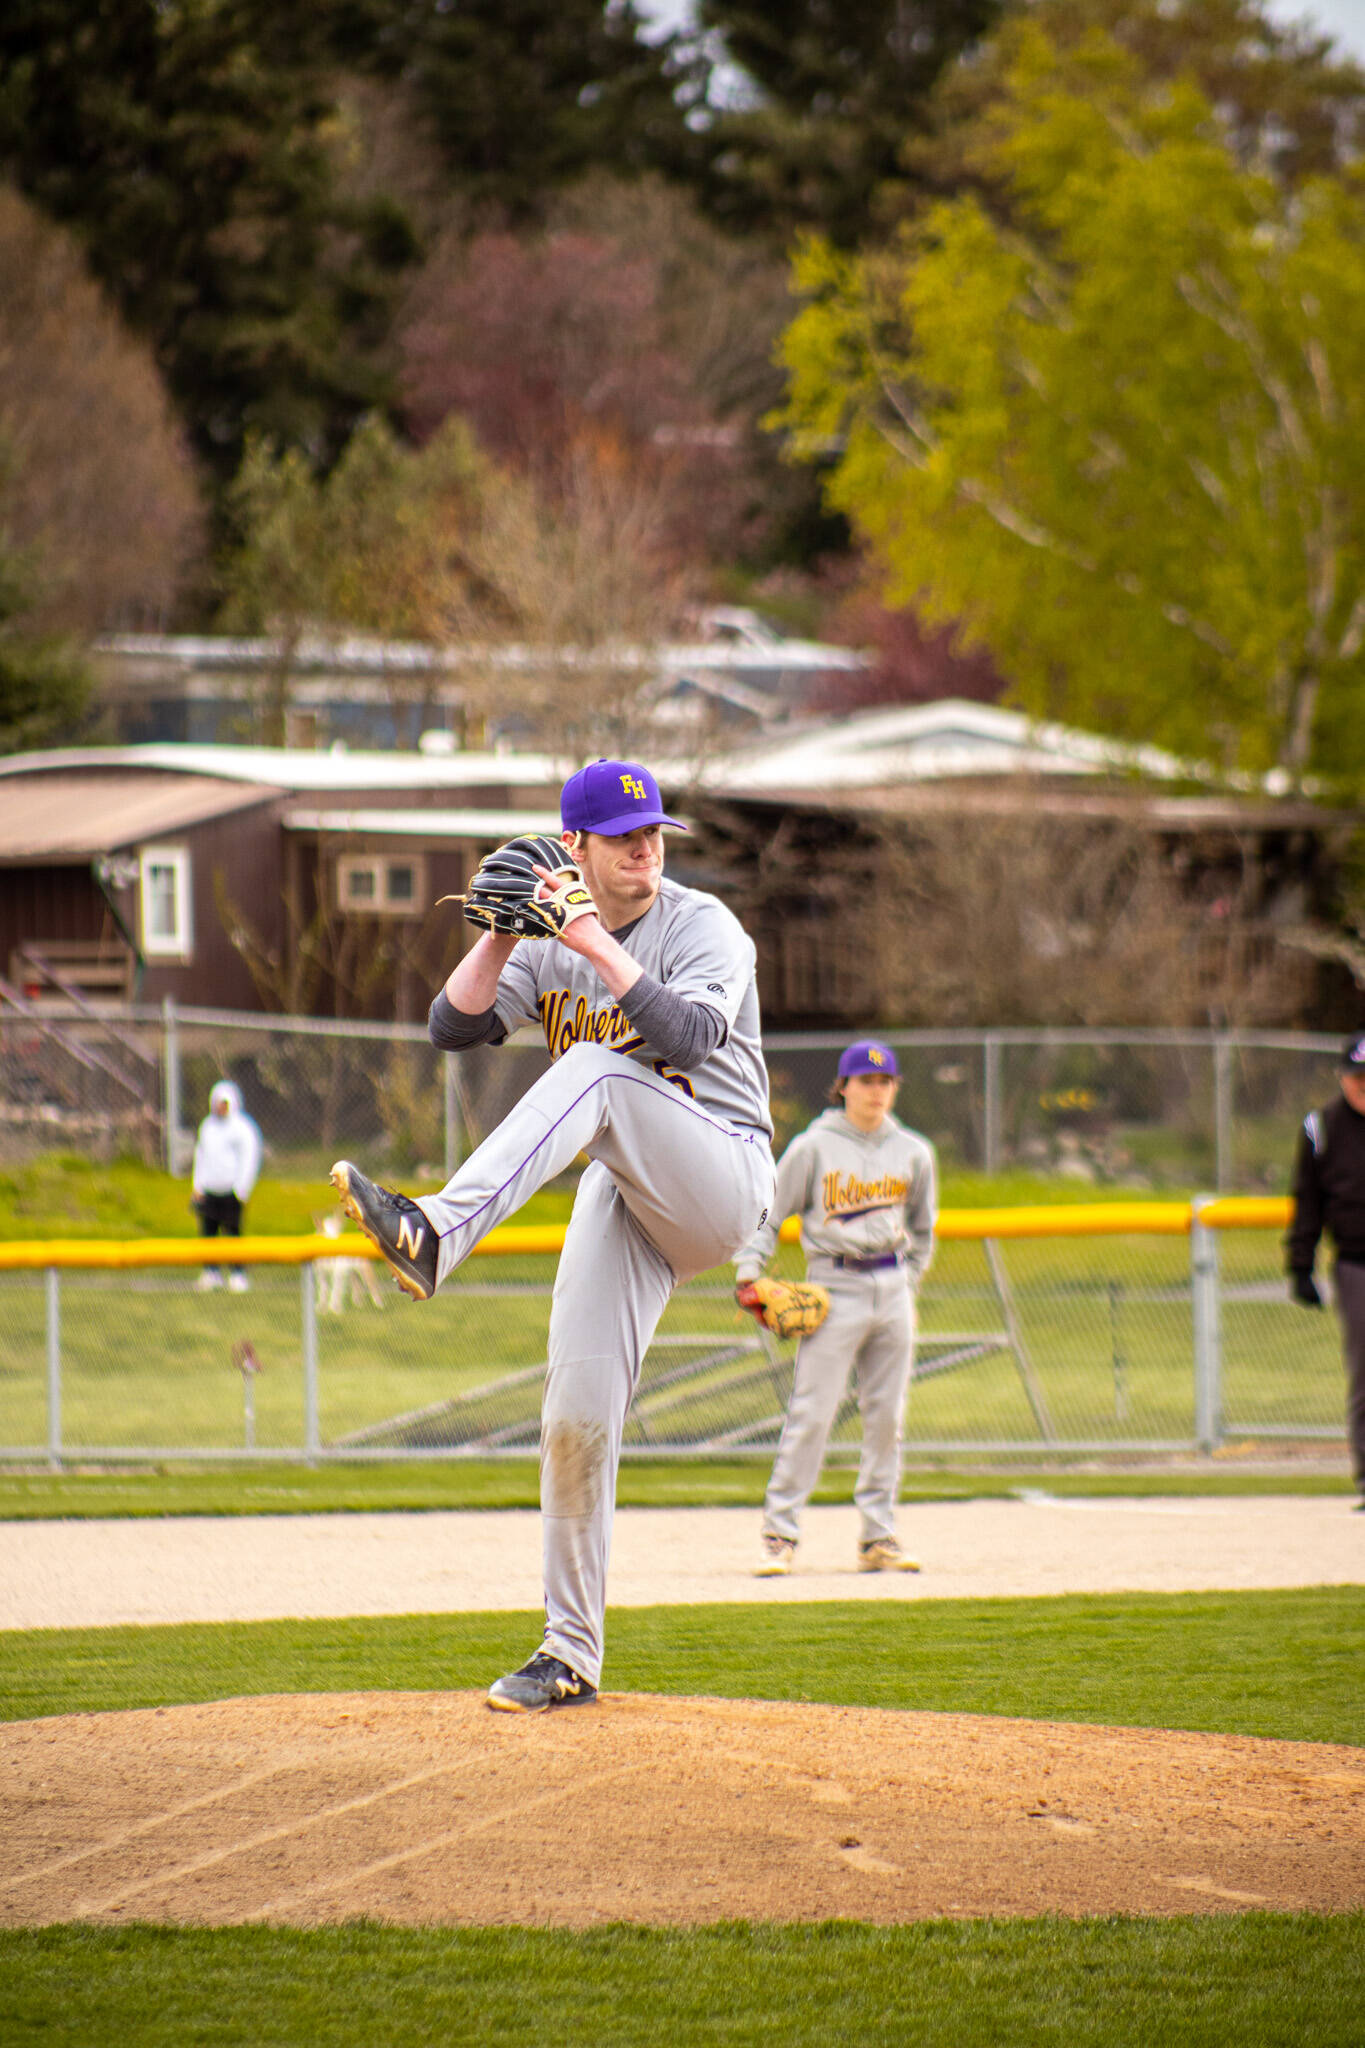 Contributed photo by Aiden Haines
Nathan Posenjak on the pitching mound